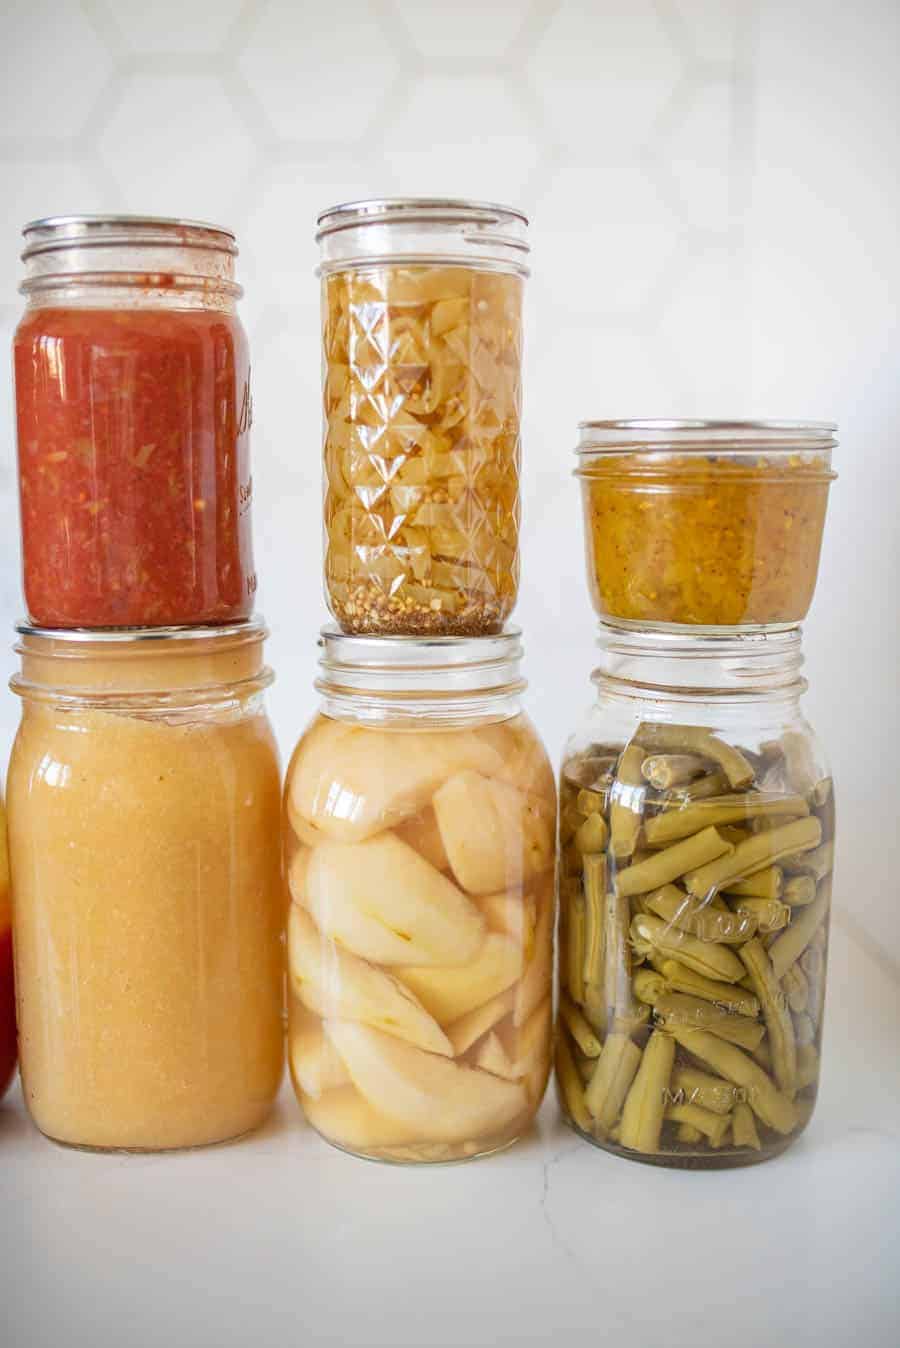 https://www.blessthismessplease.com/wp-content/uploads/2020/09/how-to-can-food-in-jars-3.jpg